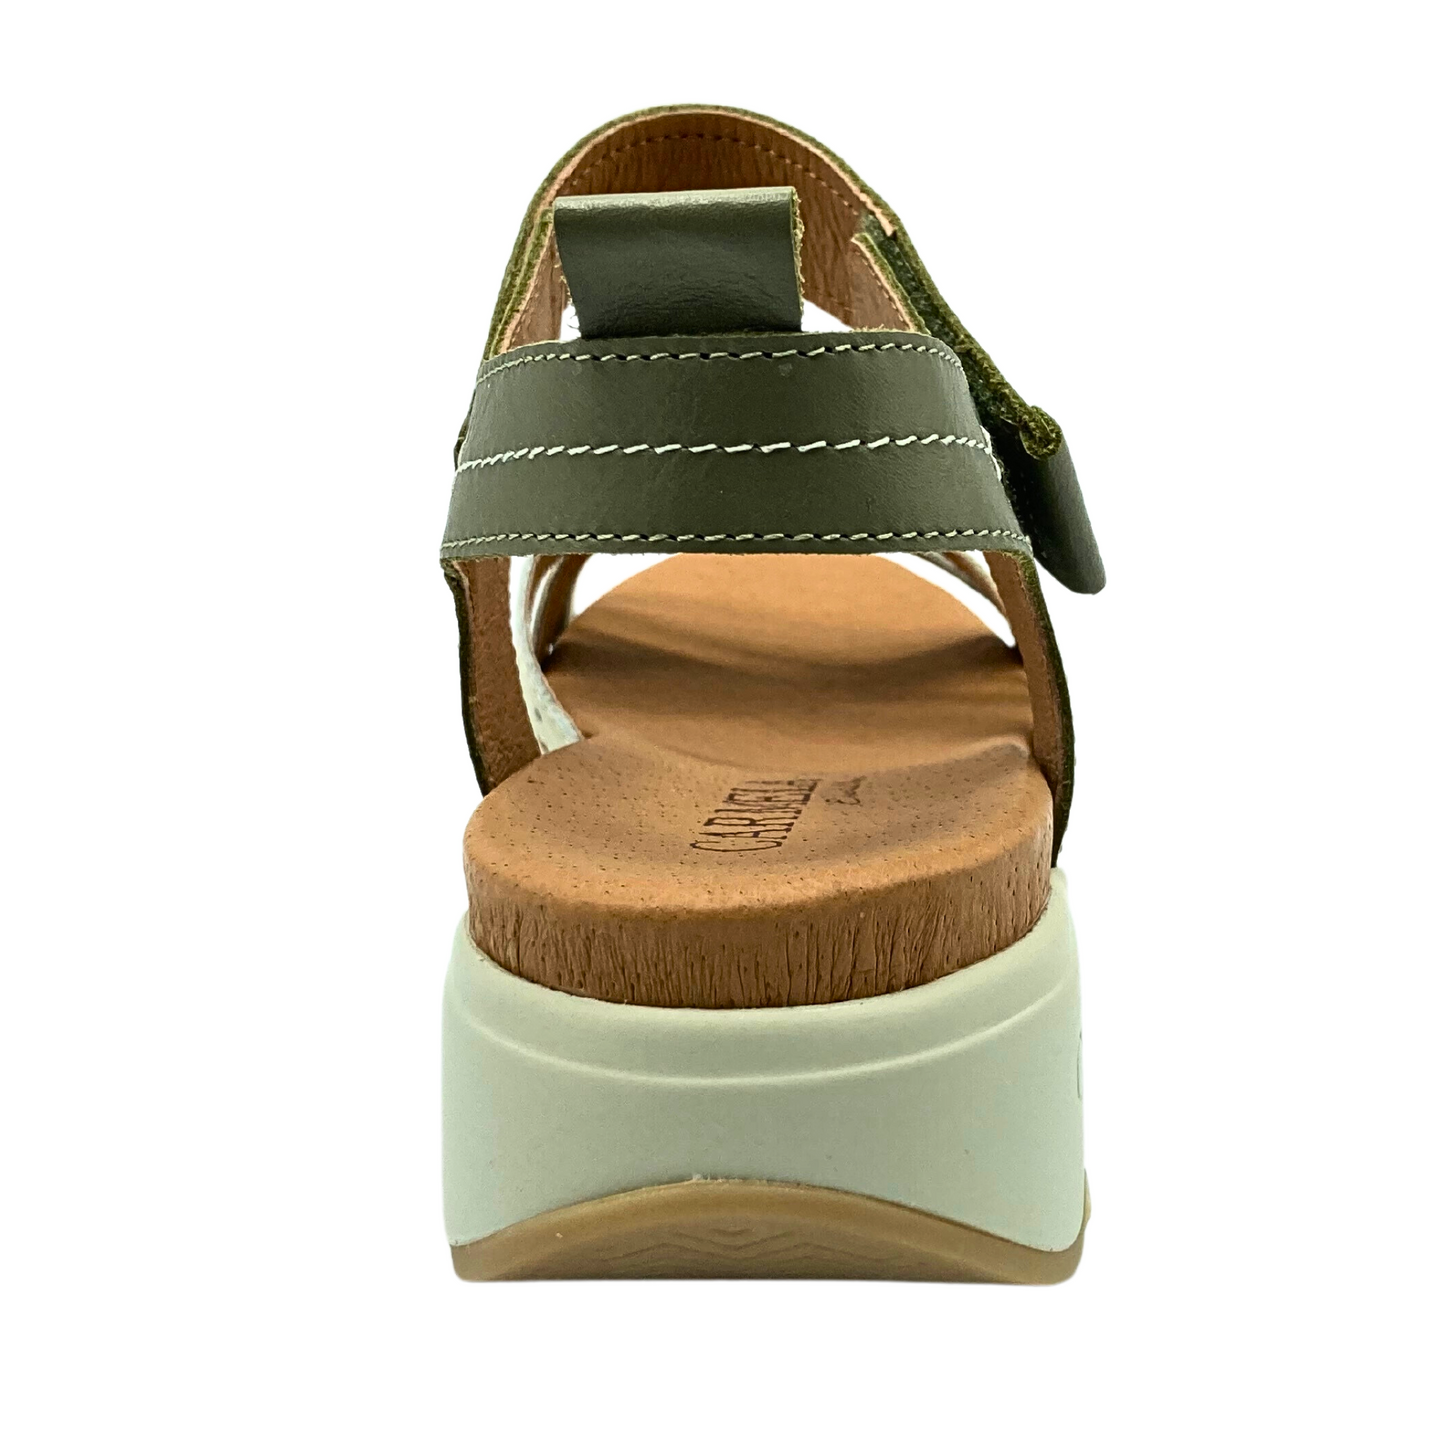 Rear view of low platform sandal by Carmela.  Solid wedge construction for and thick back strap make it a sturdy construction and easy to wear.